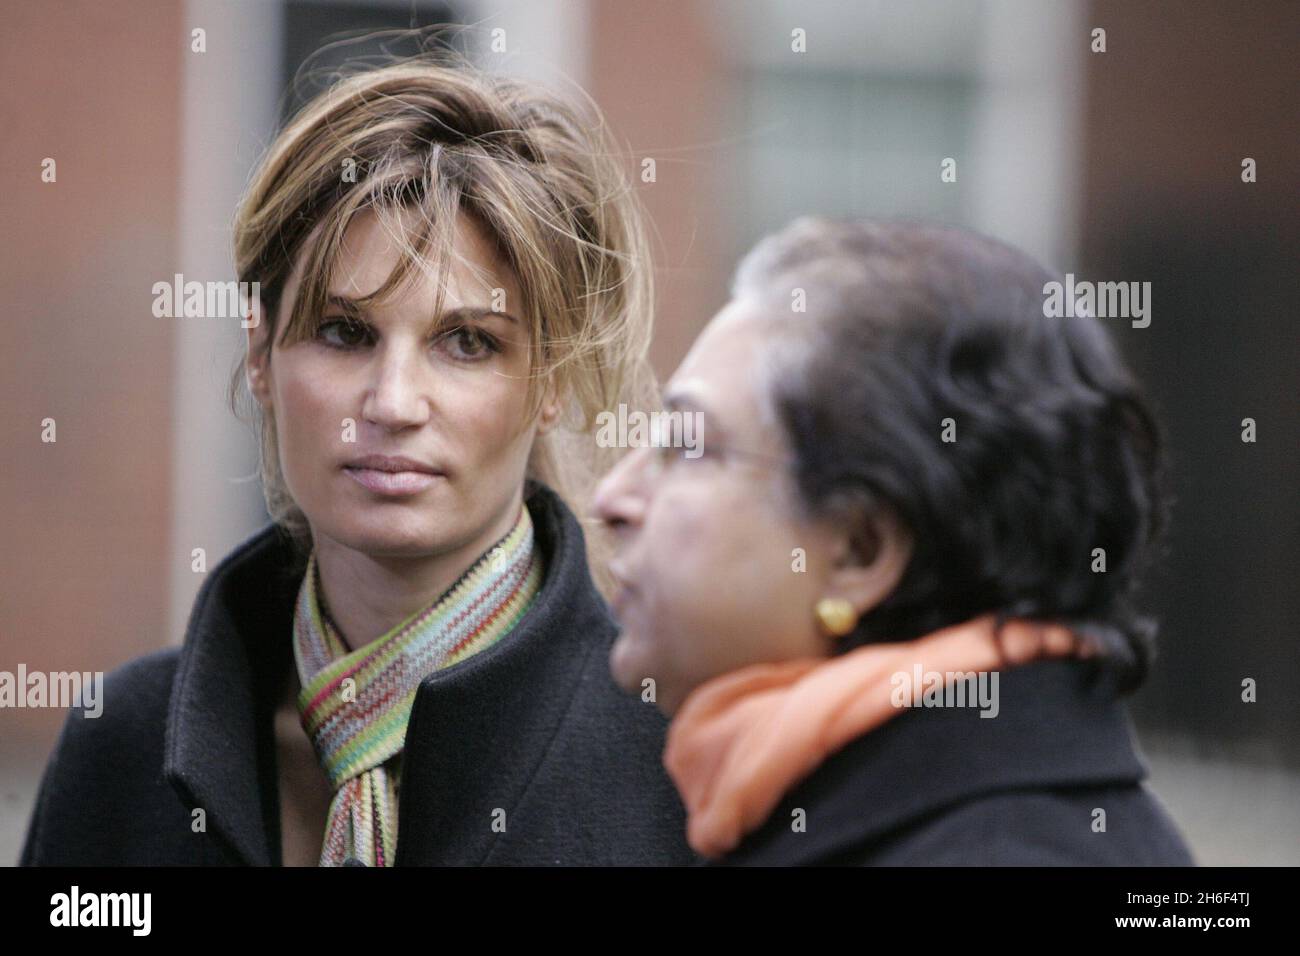 A protest for democracy in Pakistan was held in central London. The demonstration organised by Campaign Against Martial Law was lead by Jemima Khan and her family. Picture shows: Jemima Khan and Hina Jilani (General Secretary Of Human Rights) in Downing Street.  Stock Photo